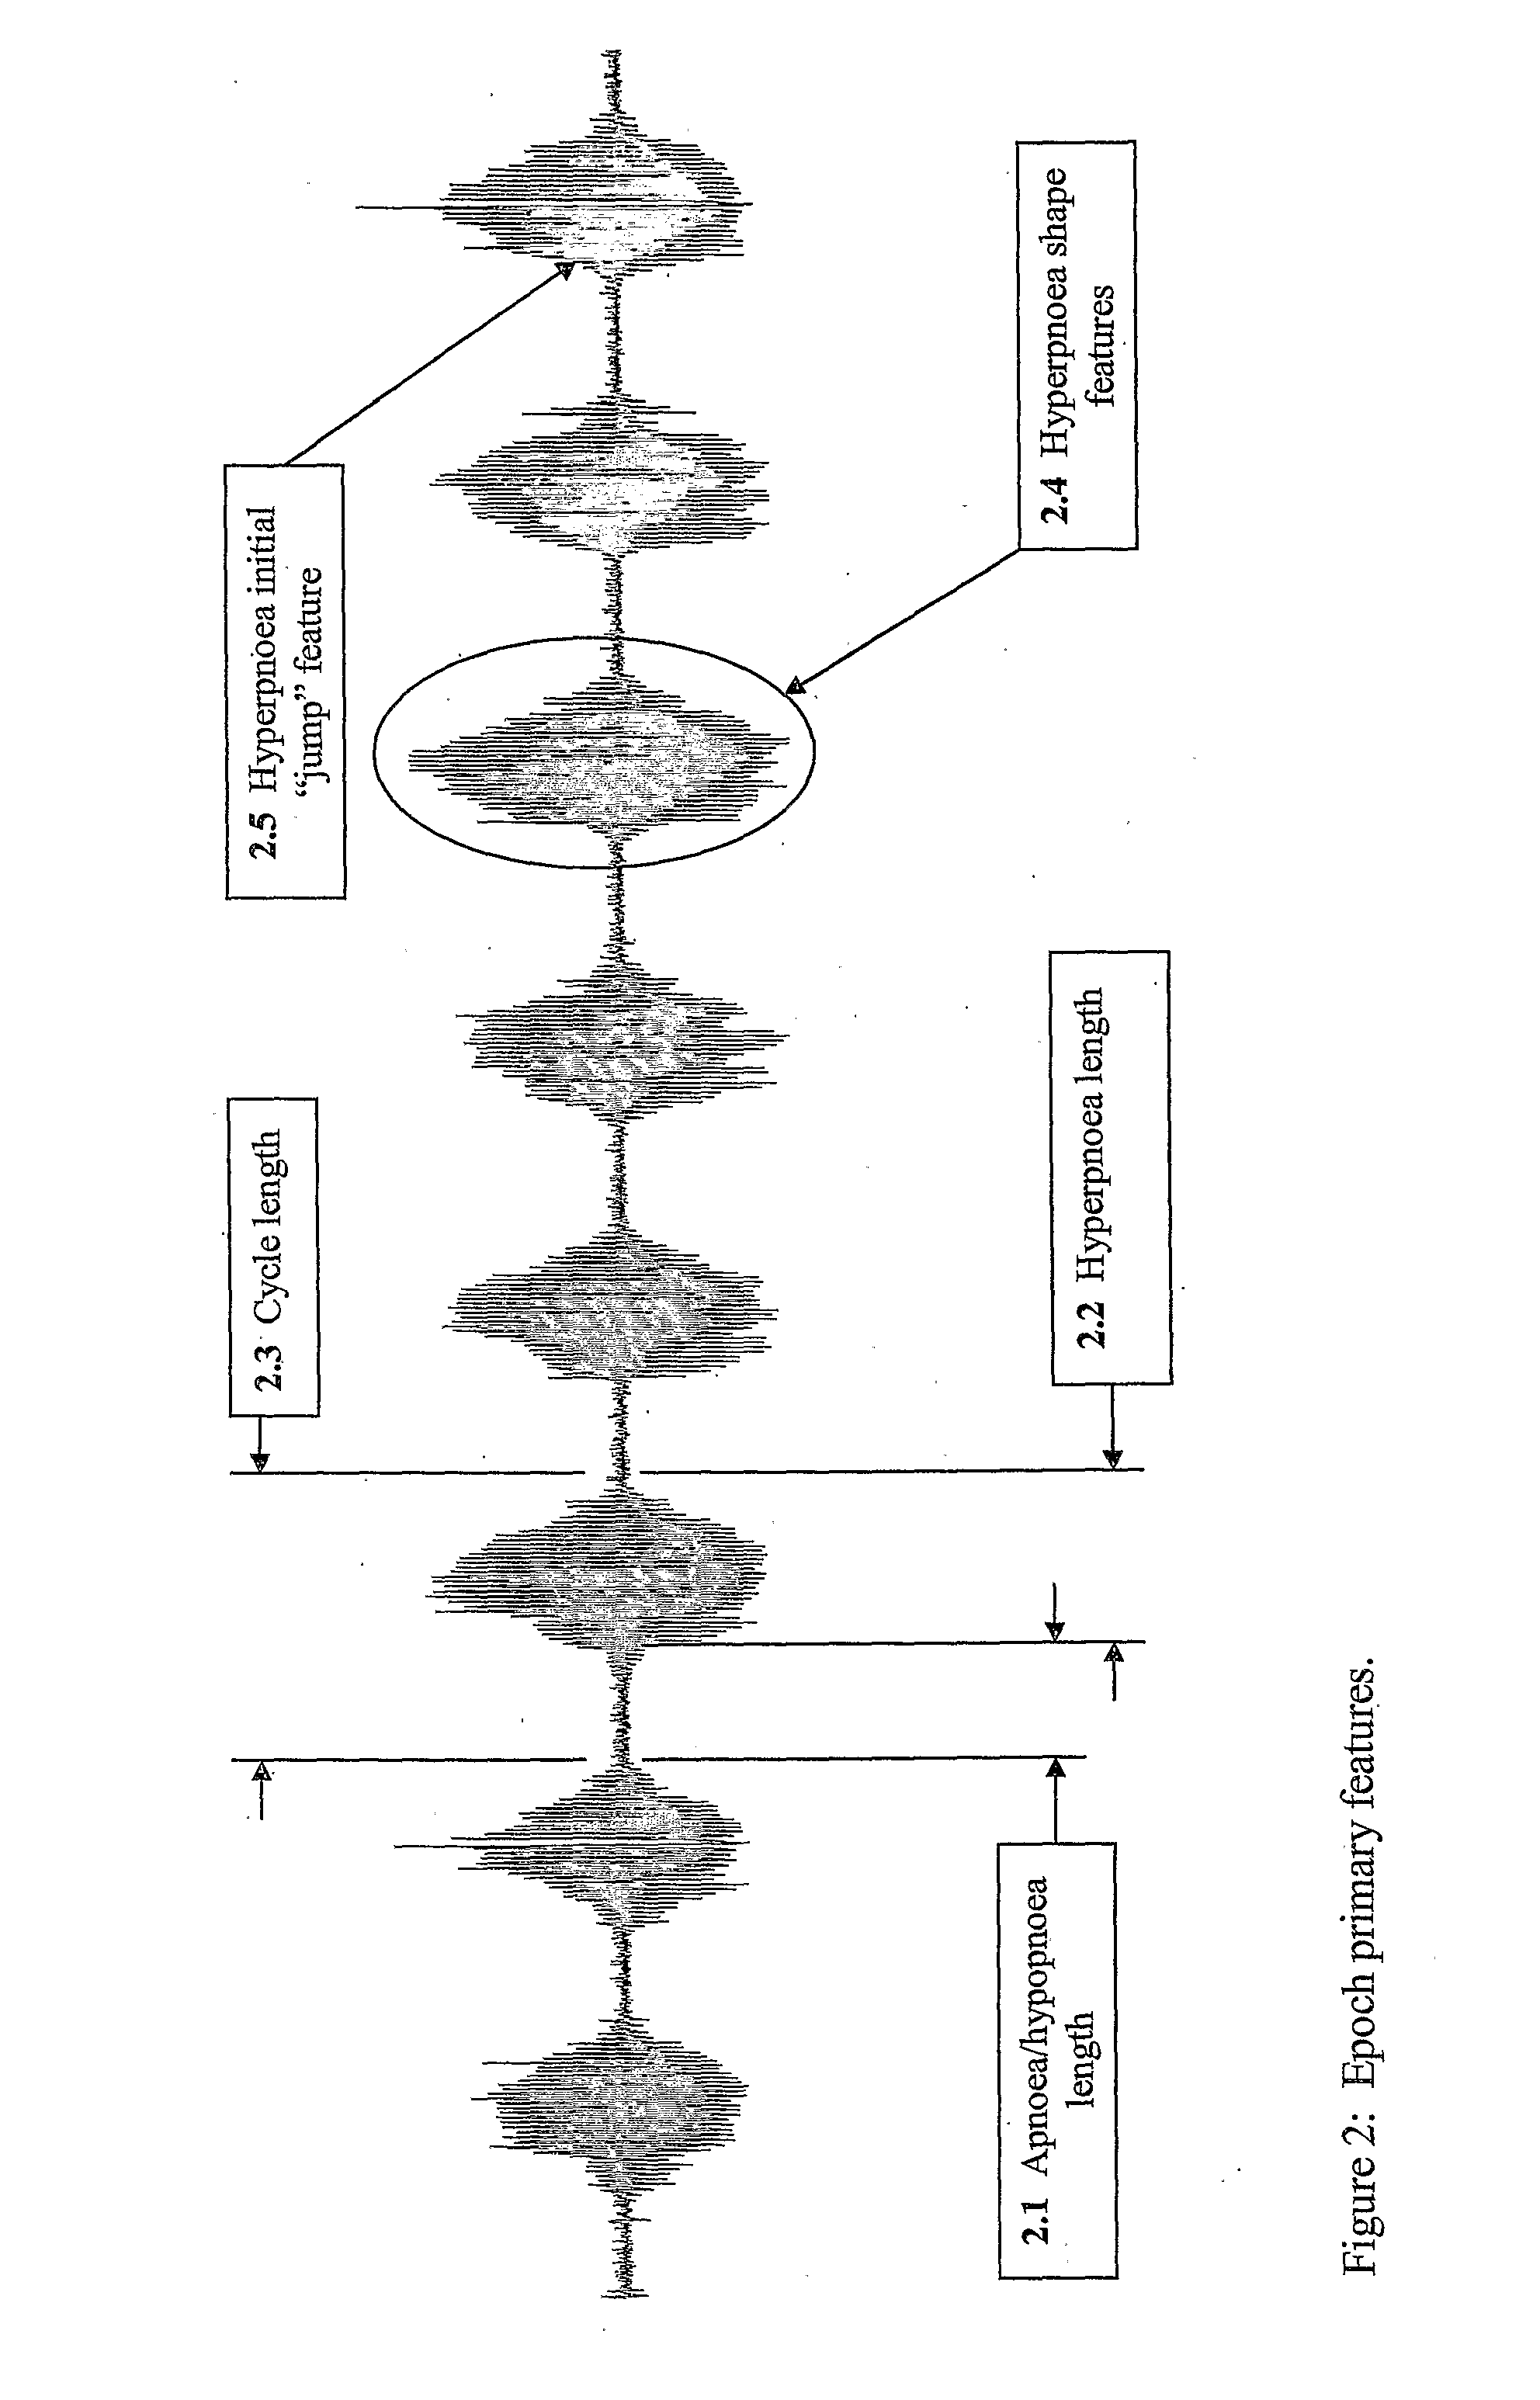 Method For Detecting and Discriminating Breathing Patterns From Respiratory Signals